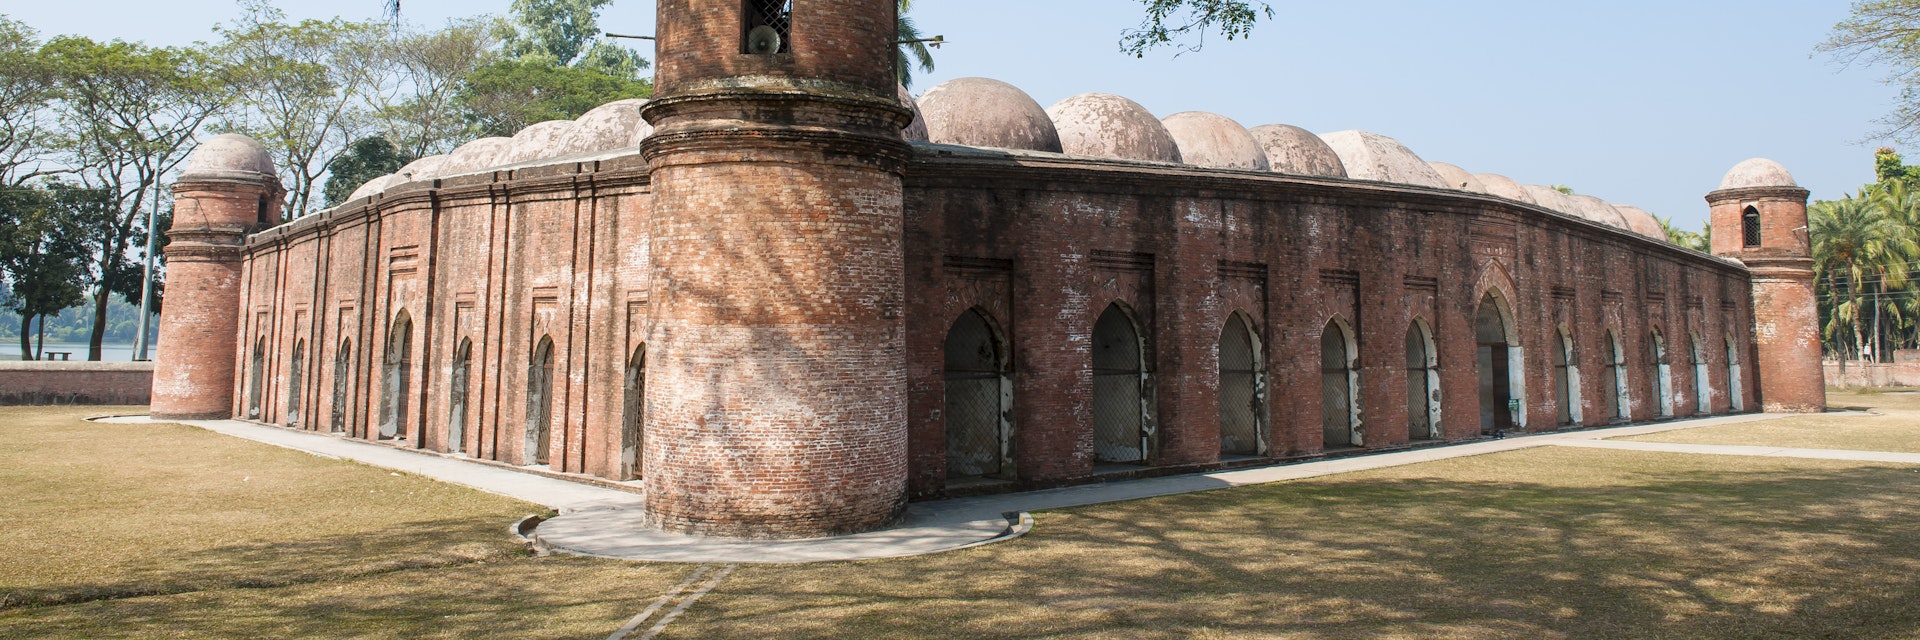 172475612
Antiquities; Asia; bagerhat; Bangladesh; Bangladeshi Culture; Benglalese; Cultures; Famous Place; Shait Gumbad Mosque; Social History; Travel Destinations; History; Horizontal; Islam; UNESCO World Heritage Site; Mosque; No People; Photography; Religion;
Exterior of the Sixty Dome Mosque (Sha Gombuj Moshjid), a UNESCO World Heritage site.